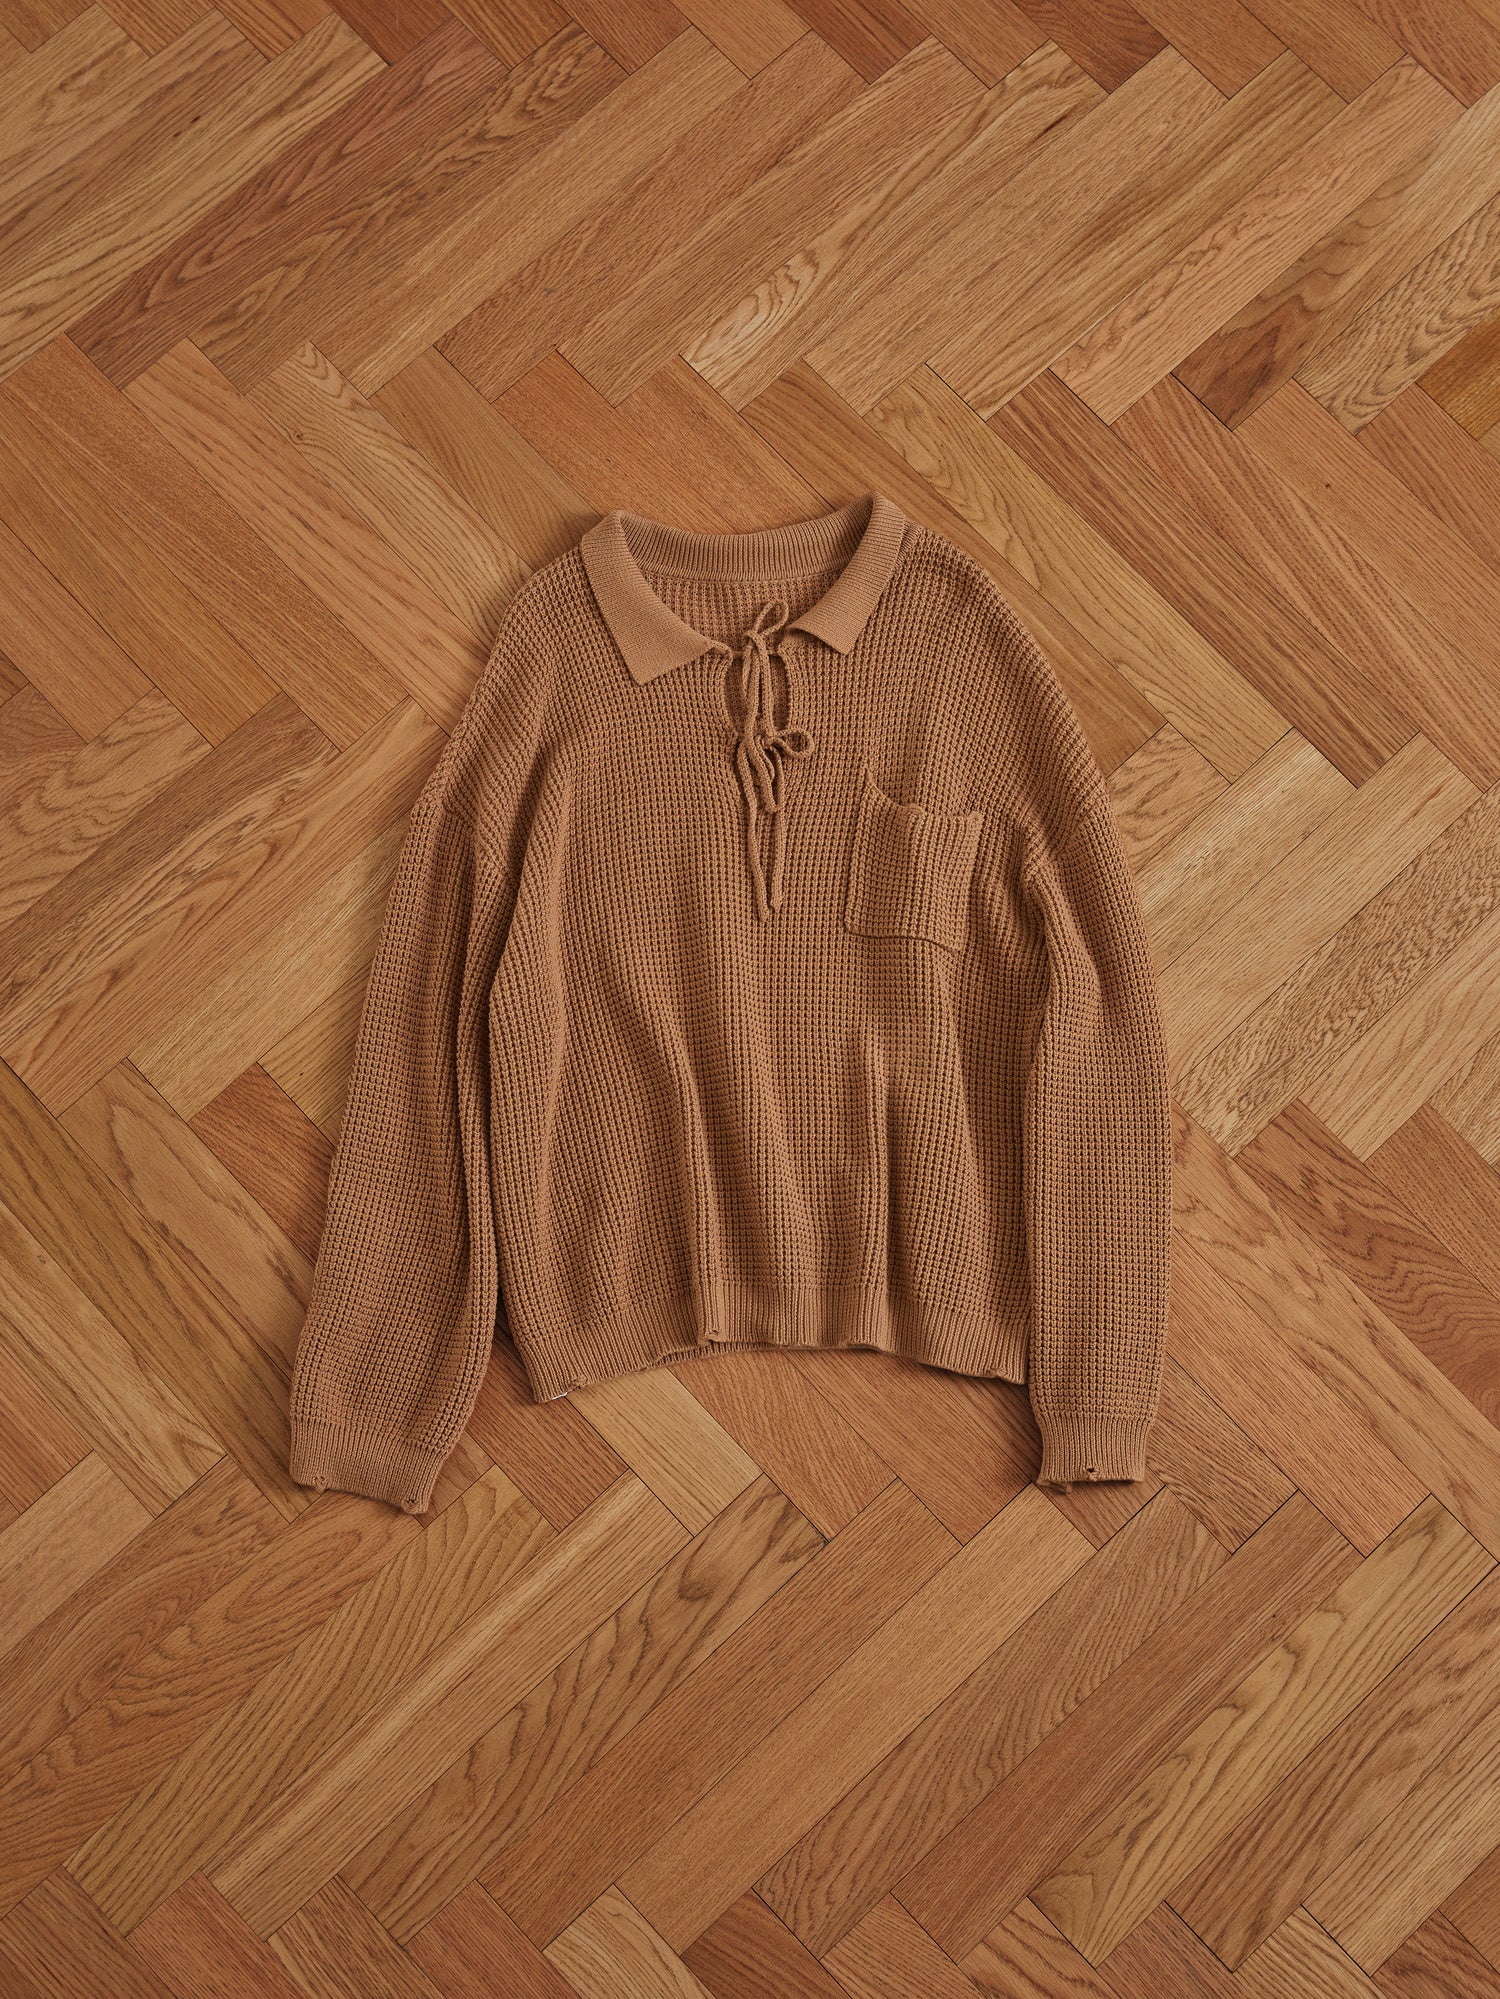 A Found Tie-Collar Knit Sweater in a cozy feel on a wooden floor.